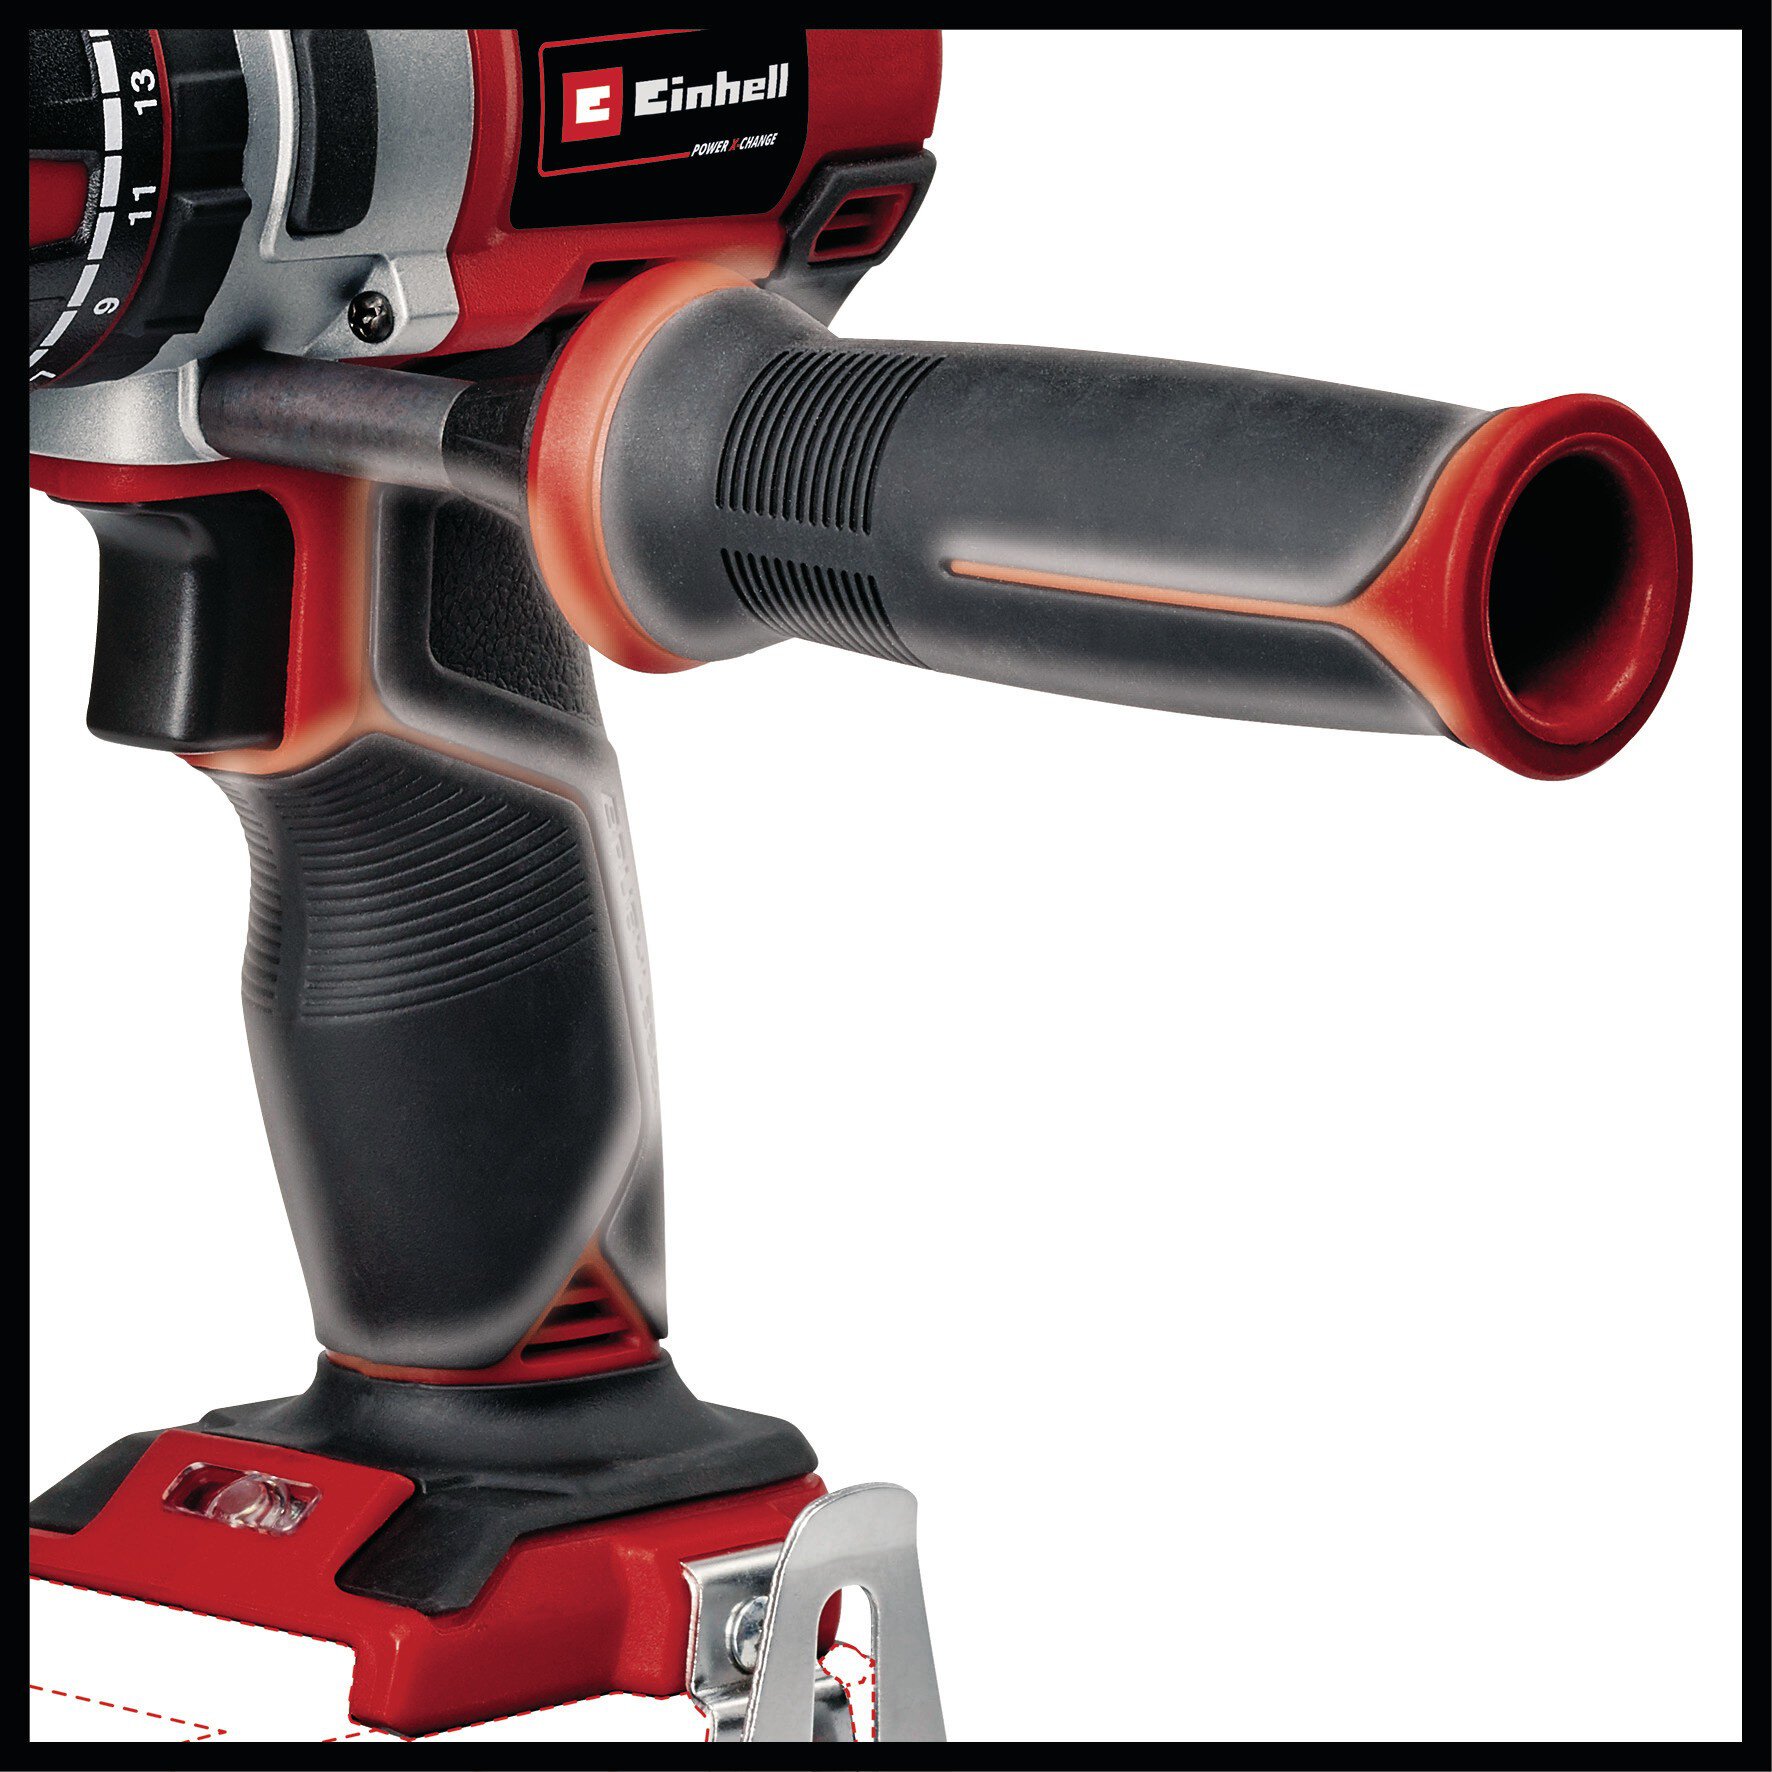 einhell-professional-cordless-impact-drill-4513860-detail_image-004